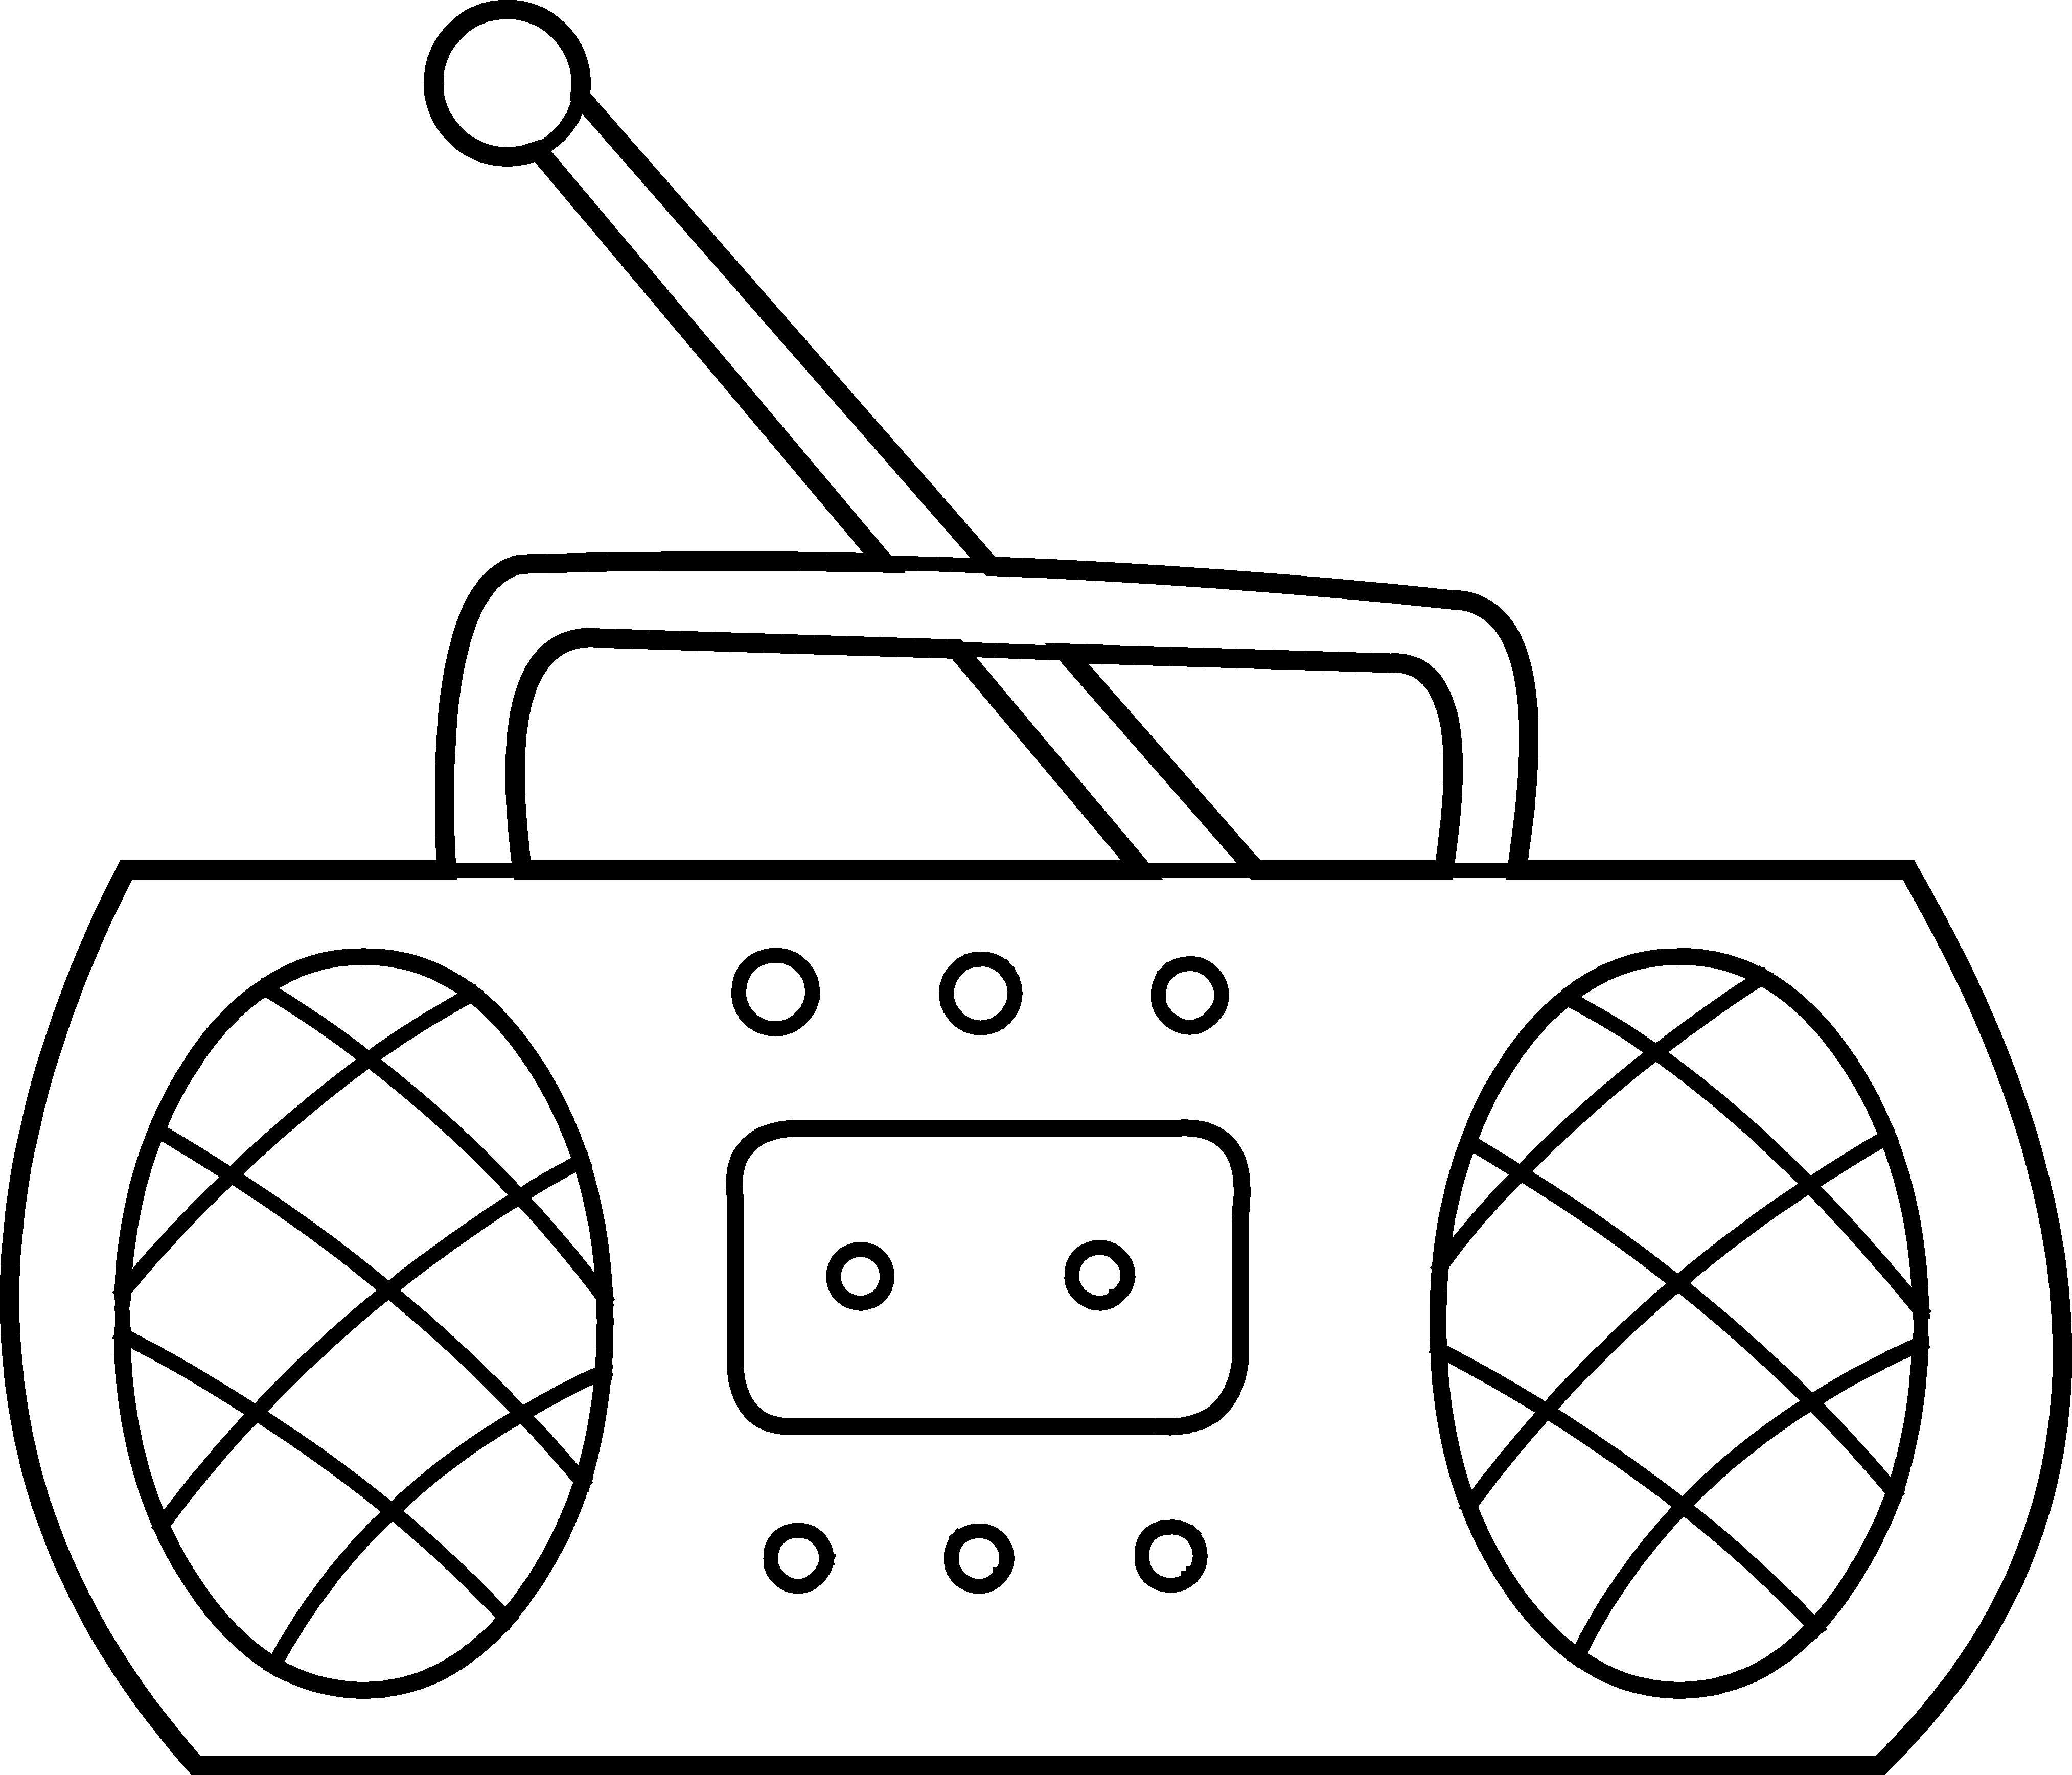 Jukebox clipart radio. Coloring page free clip